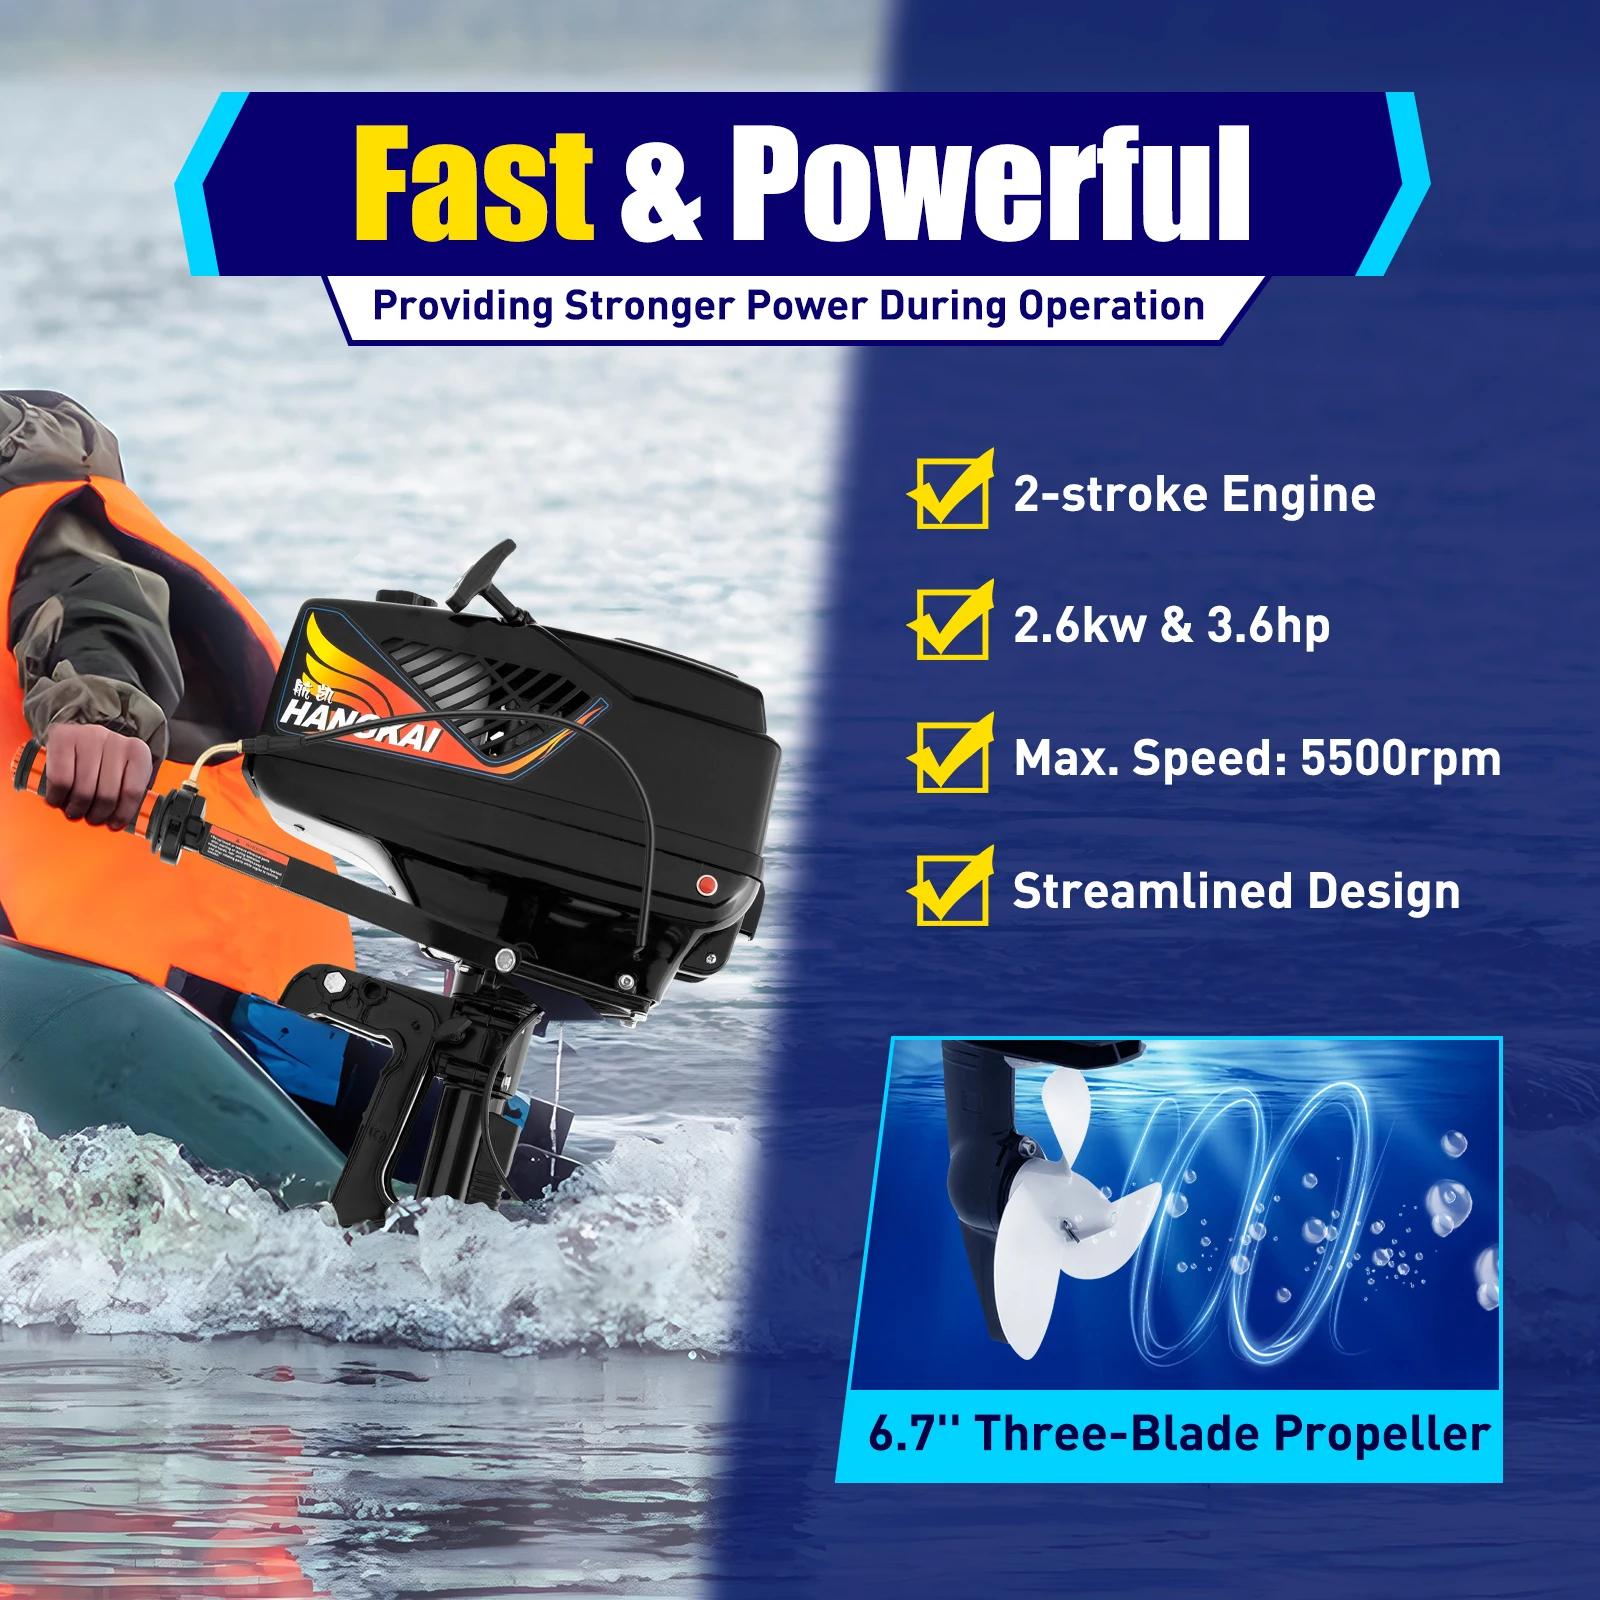 3.6HP 2 Stroke Heavy Duty Outboard Motor Fishing Boat Engine CDI Ignition Water Cooling System Short Shaft Shipping From US heavy duty 3 stage whole house caravan boat rv water filtration system include 10 sediment 5um carbon block sediment 1um